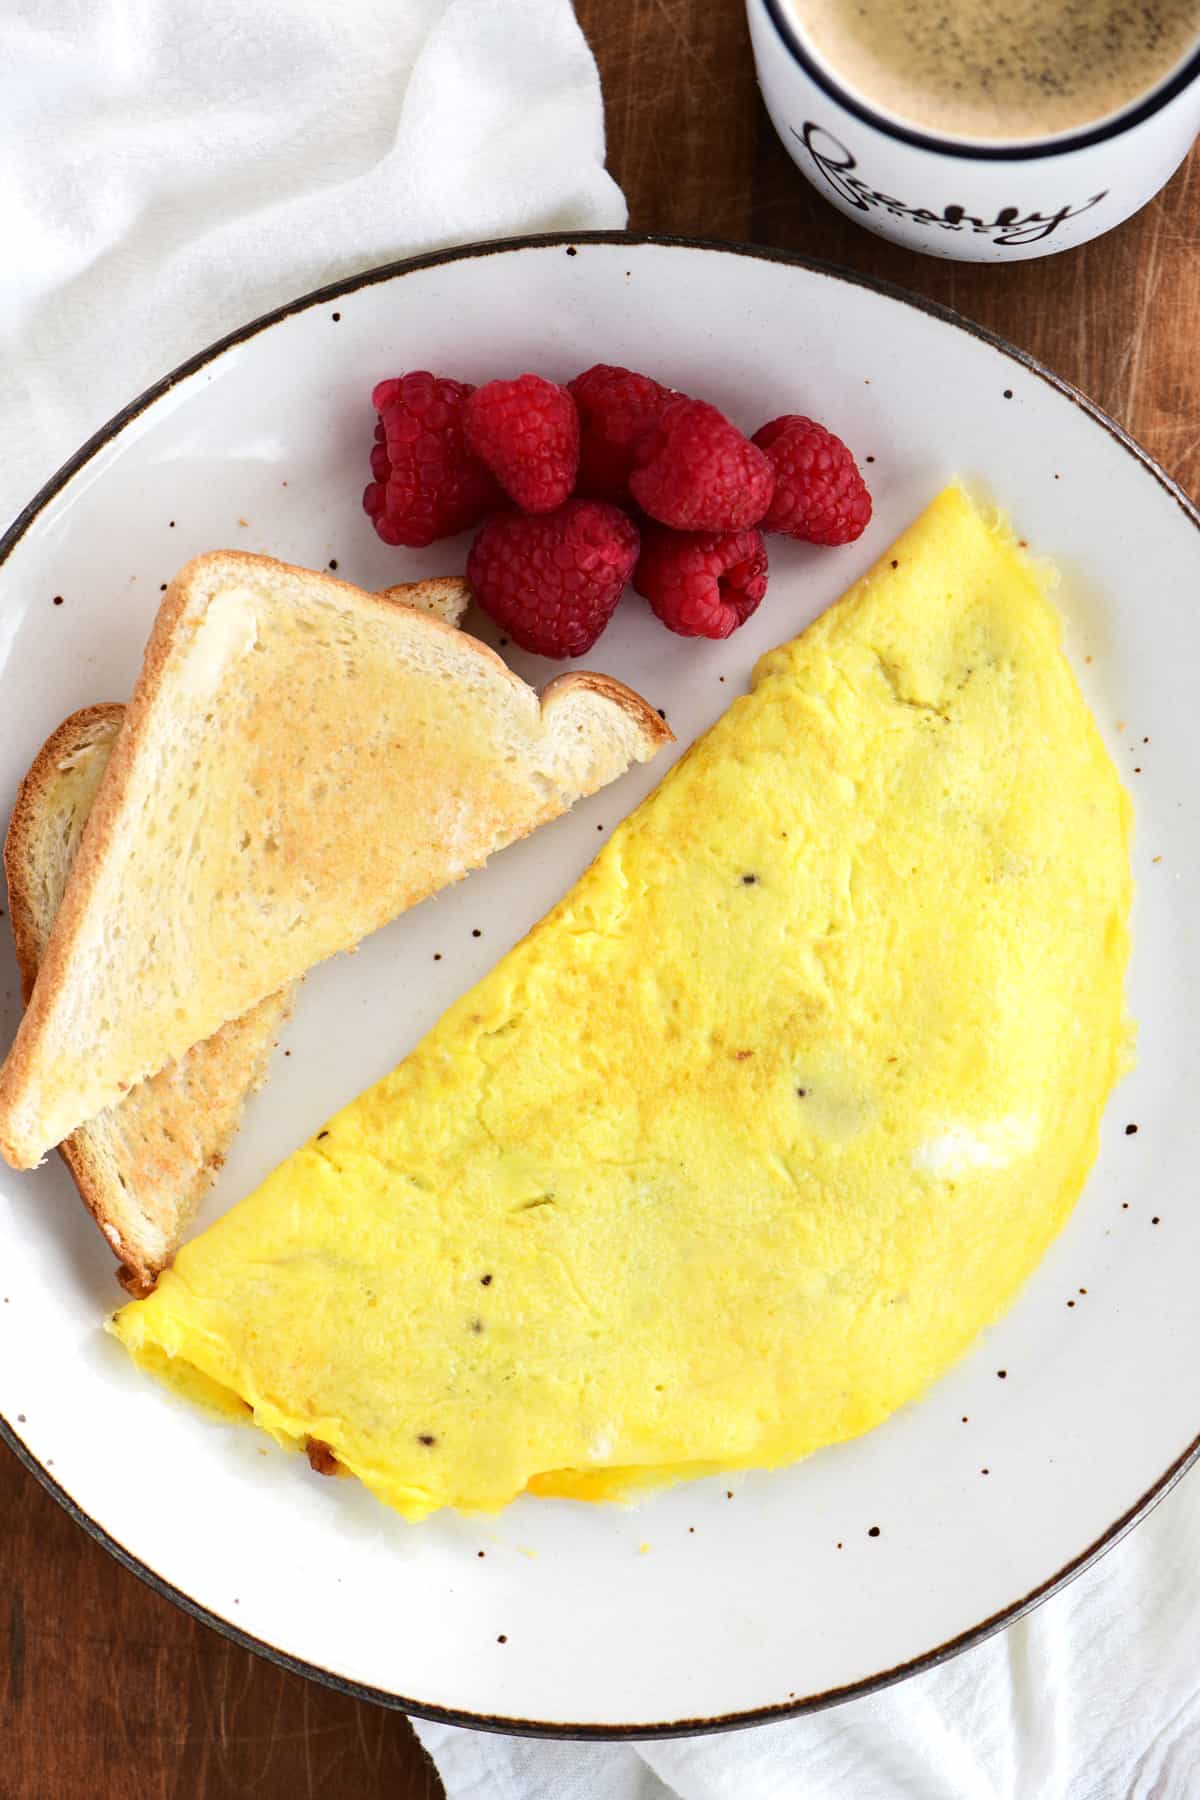 topdown view of an omelet, buttered toast and raspberries on a white speckled plate